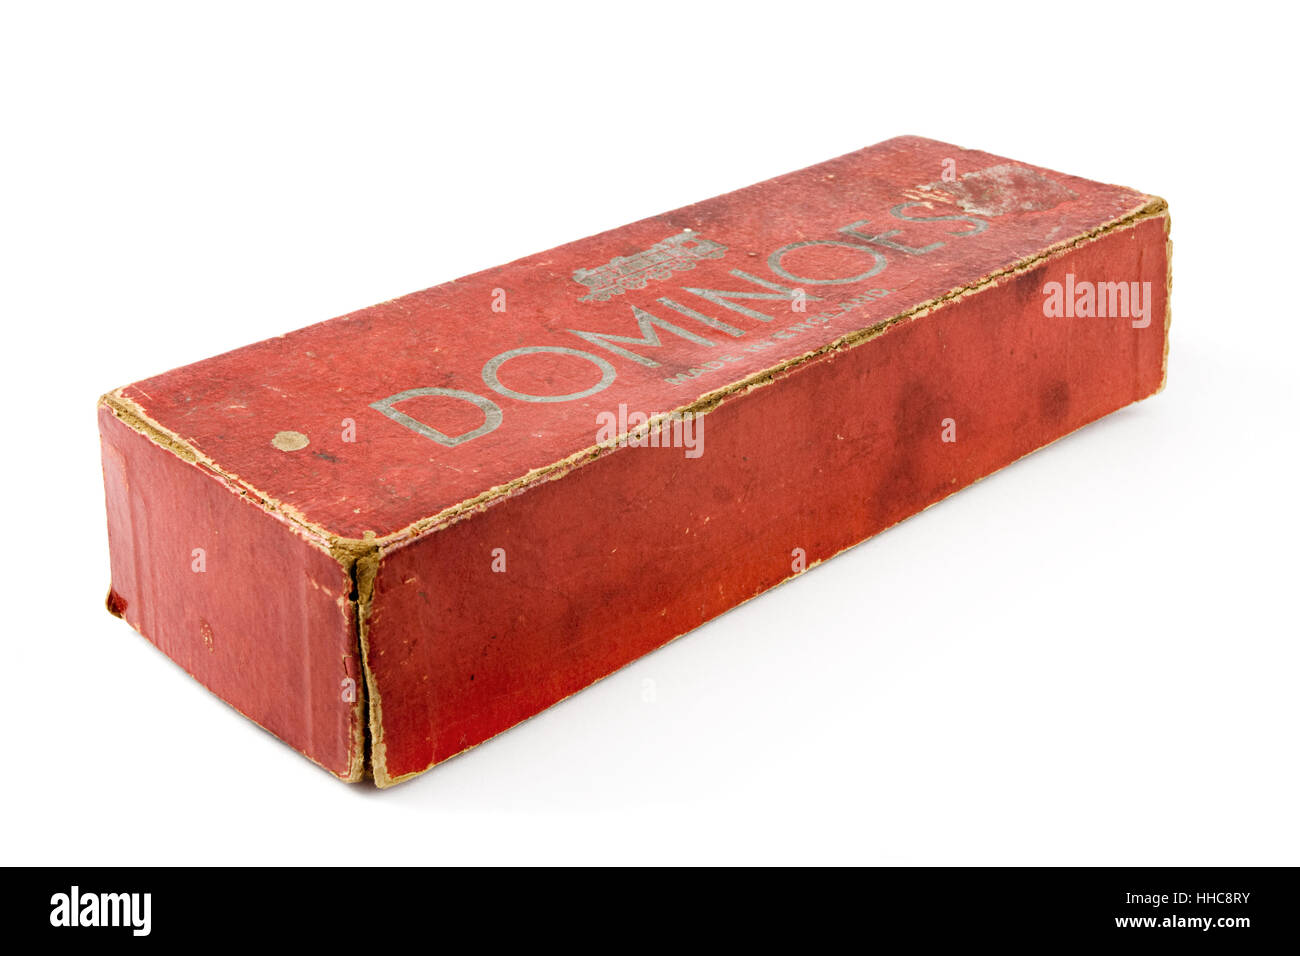 antique, box, boxes, worn, old-fashioned, outdated, anachronistic, damaged, Stock Photo